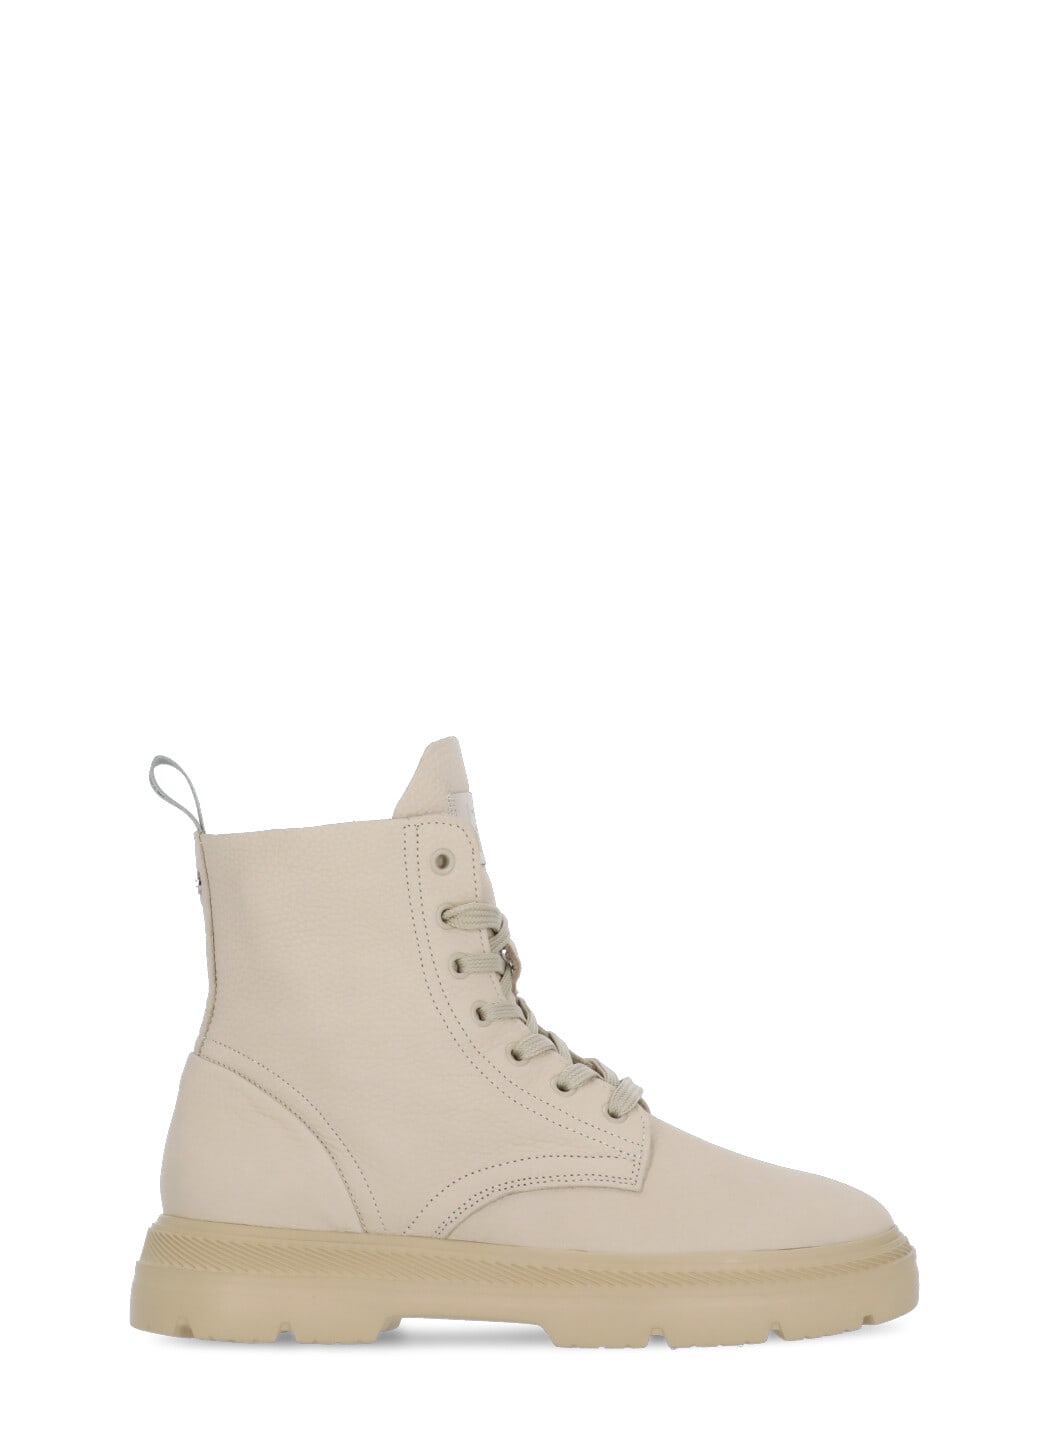 Woolrich Military Army Boots